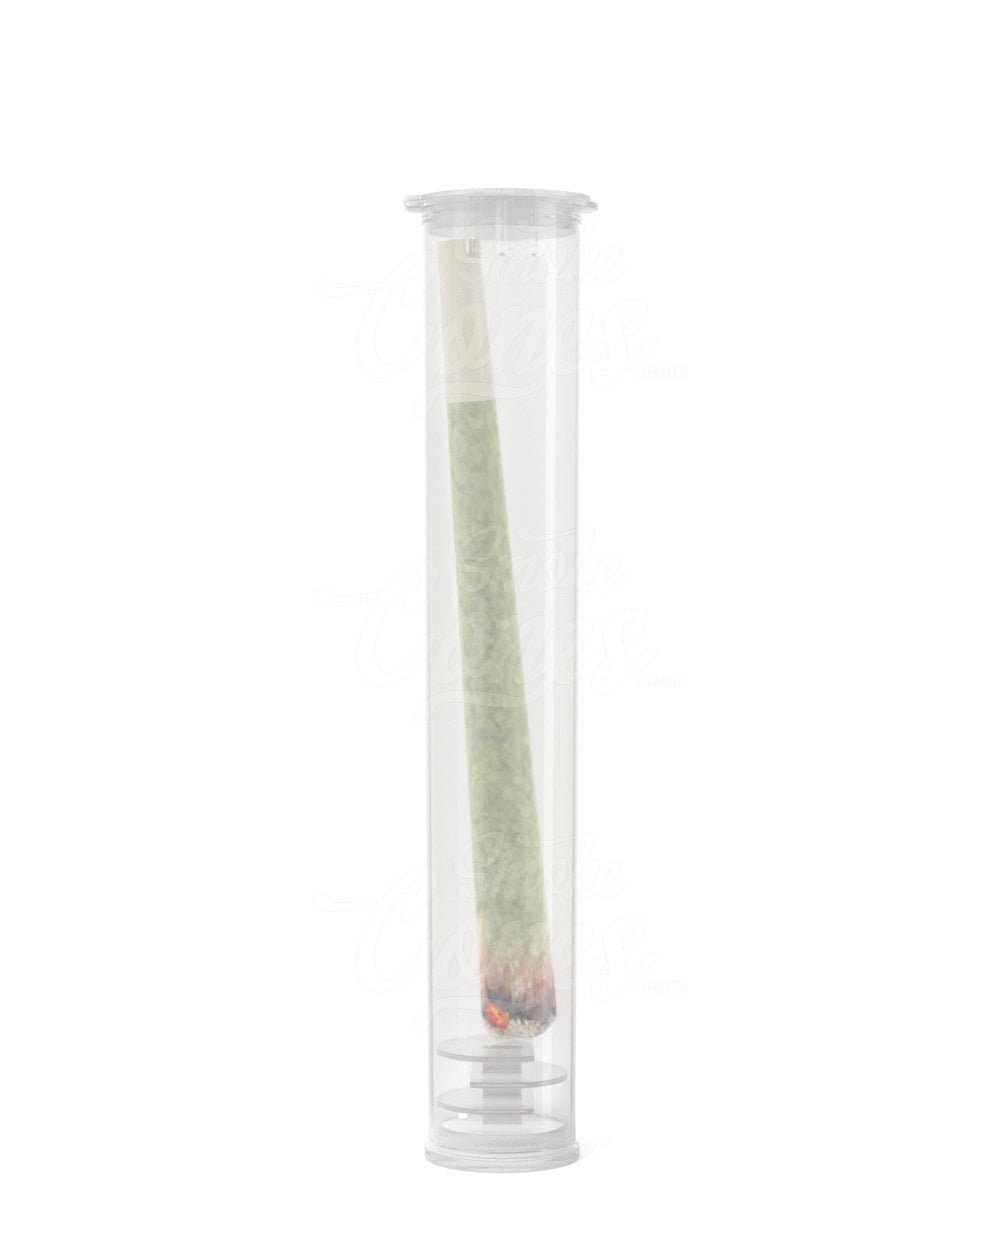 Wholesale Pre-Roll Joint Tubes in Bulk for Cannabis